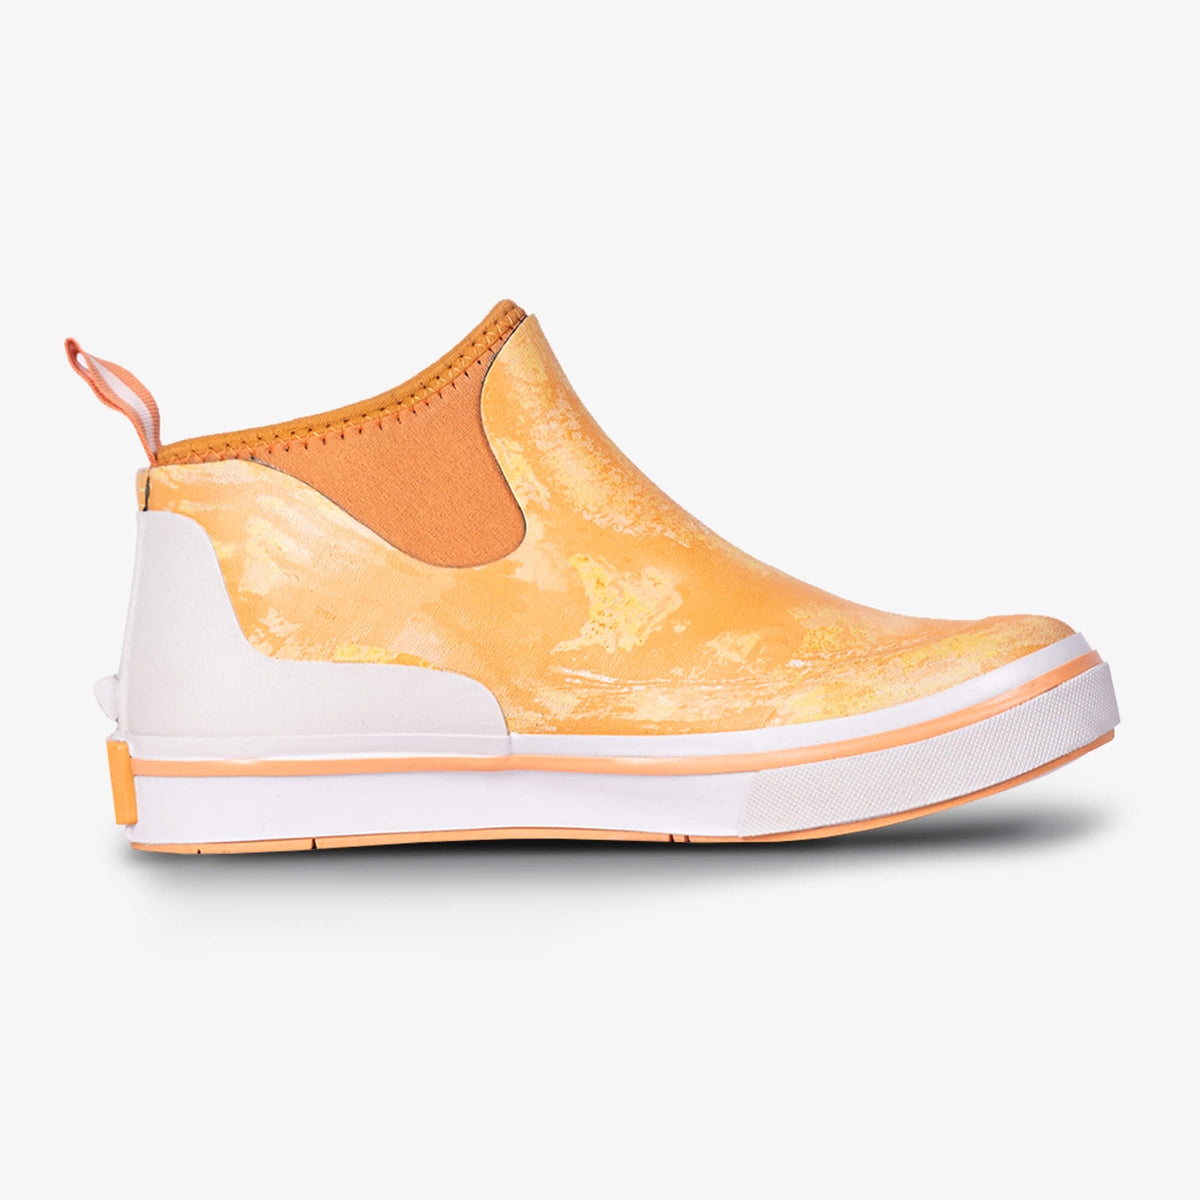 Deck Boots | Womens - Dreamsicle by Gator Waders